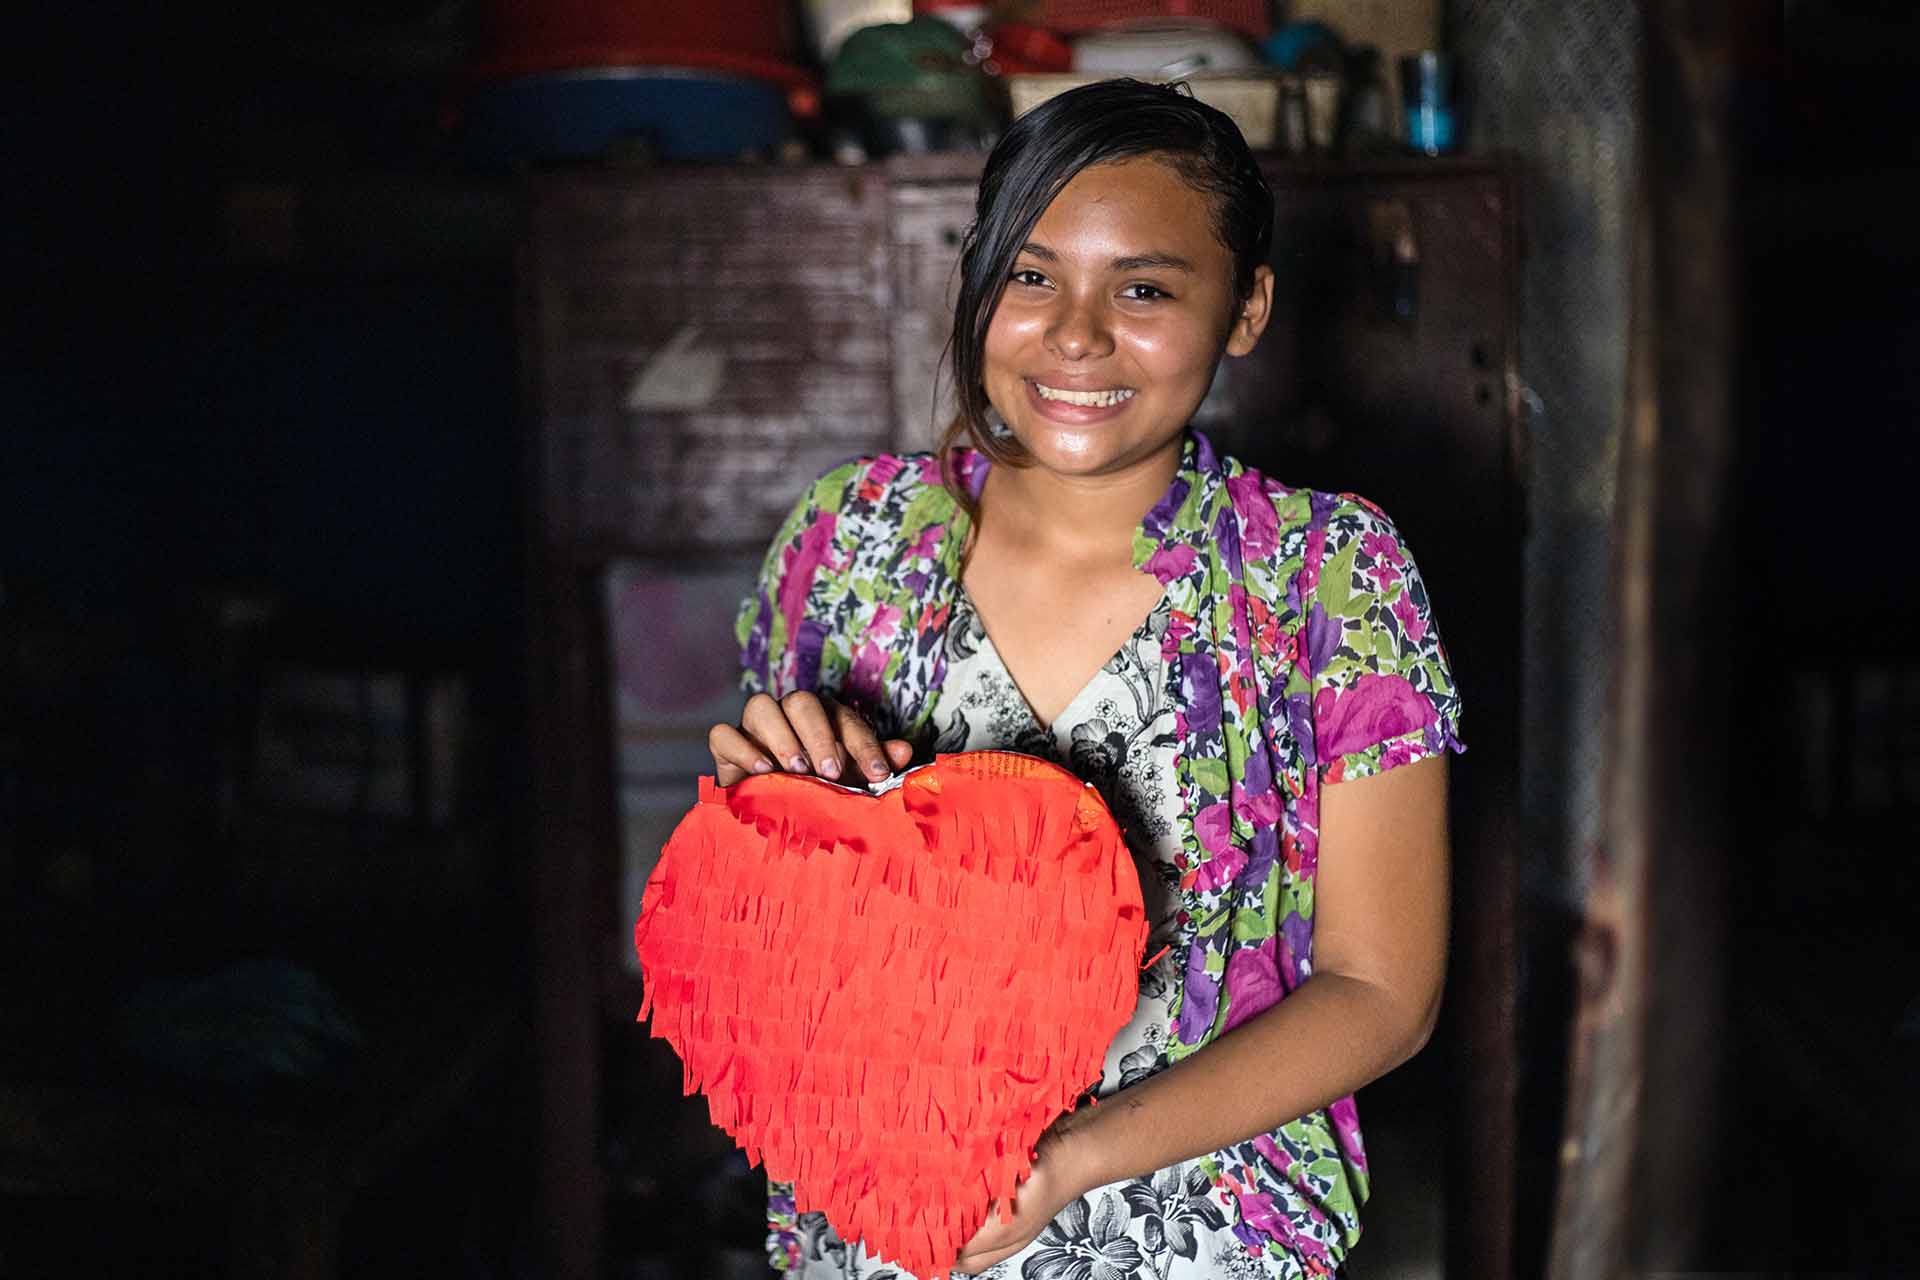 Estrella holds a piñata that she made at her Compassion center